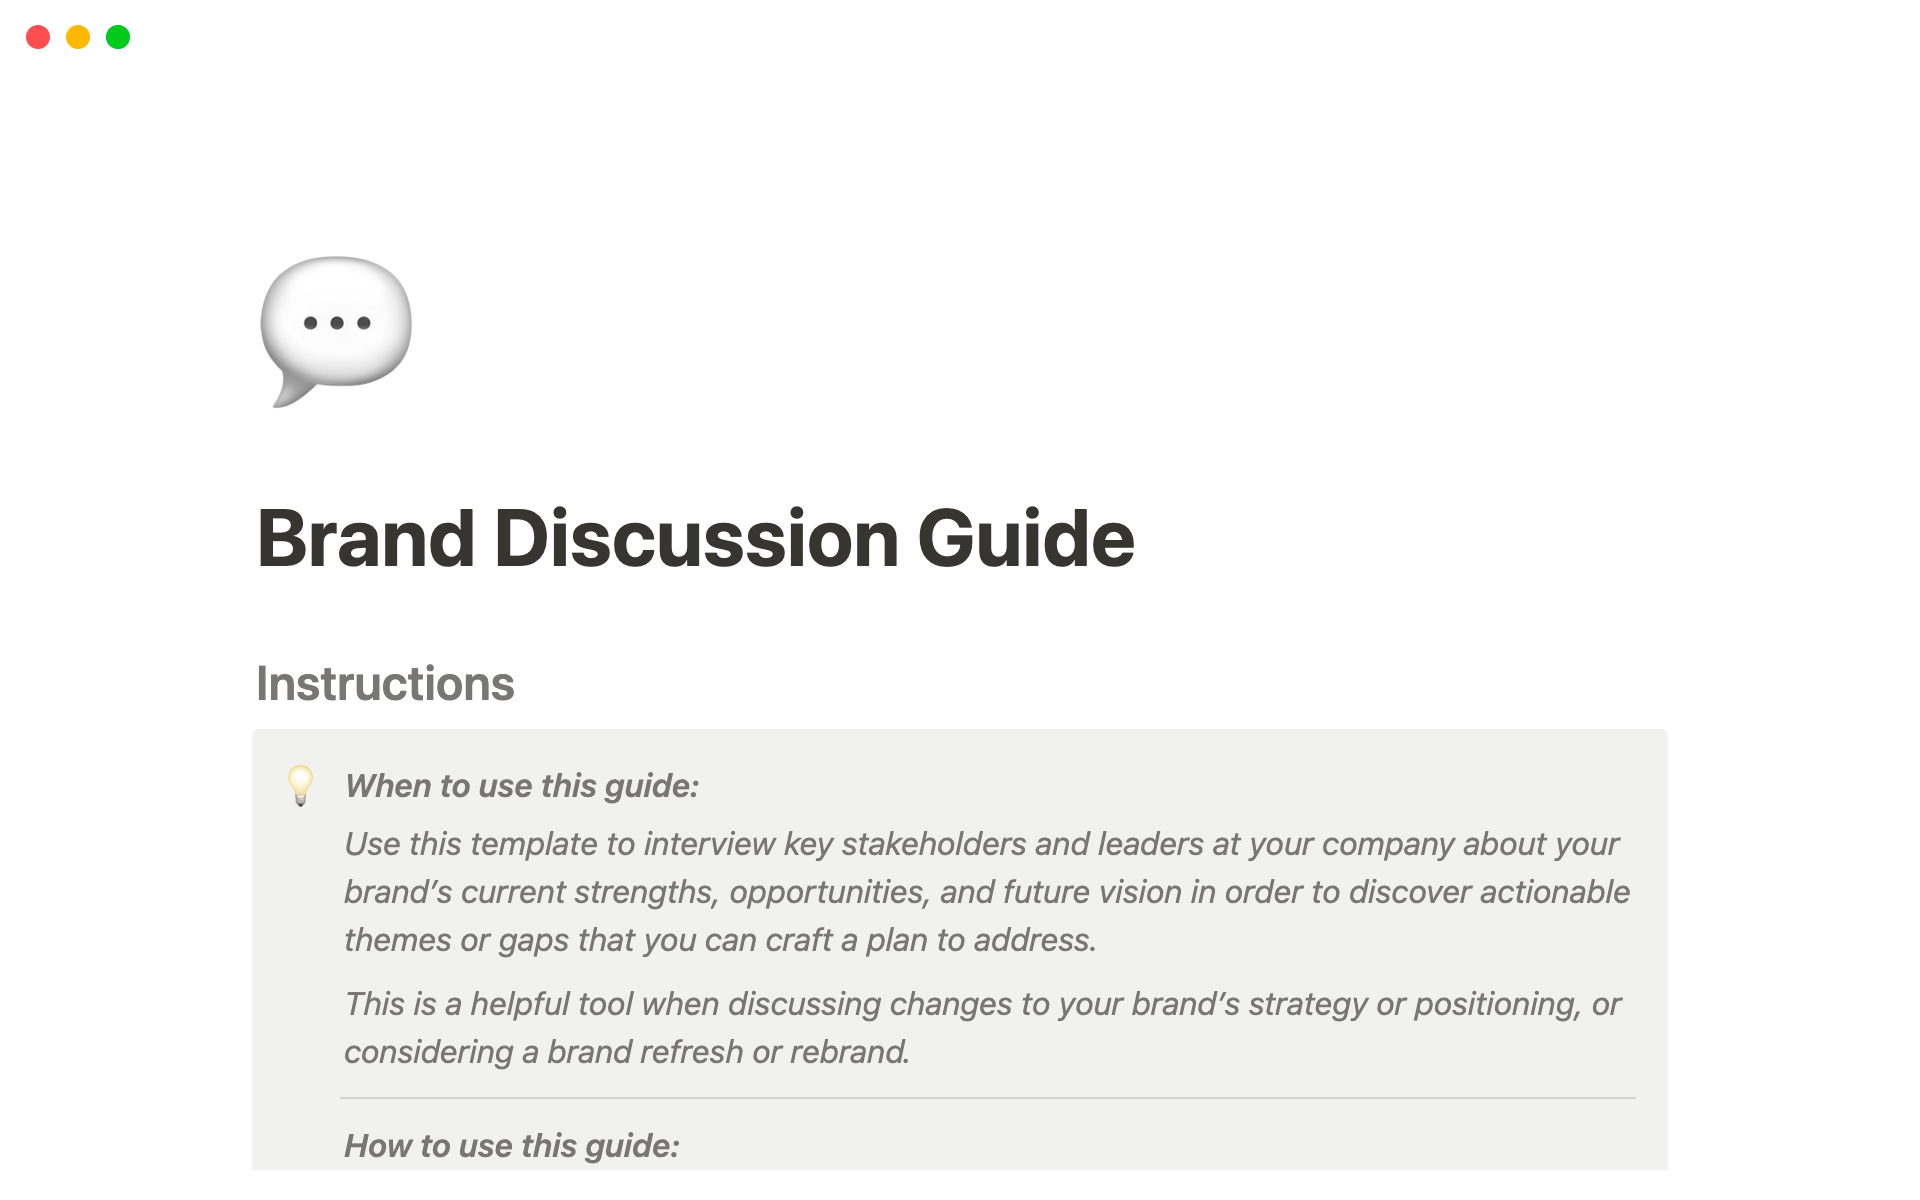 Use this discussion guide to interview key stakeholders and leaders at your company about your brand’s current strengths, opportunities, and future vision in order to discover actionable themes or gaps that you can craft a plan to address.